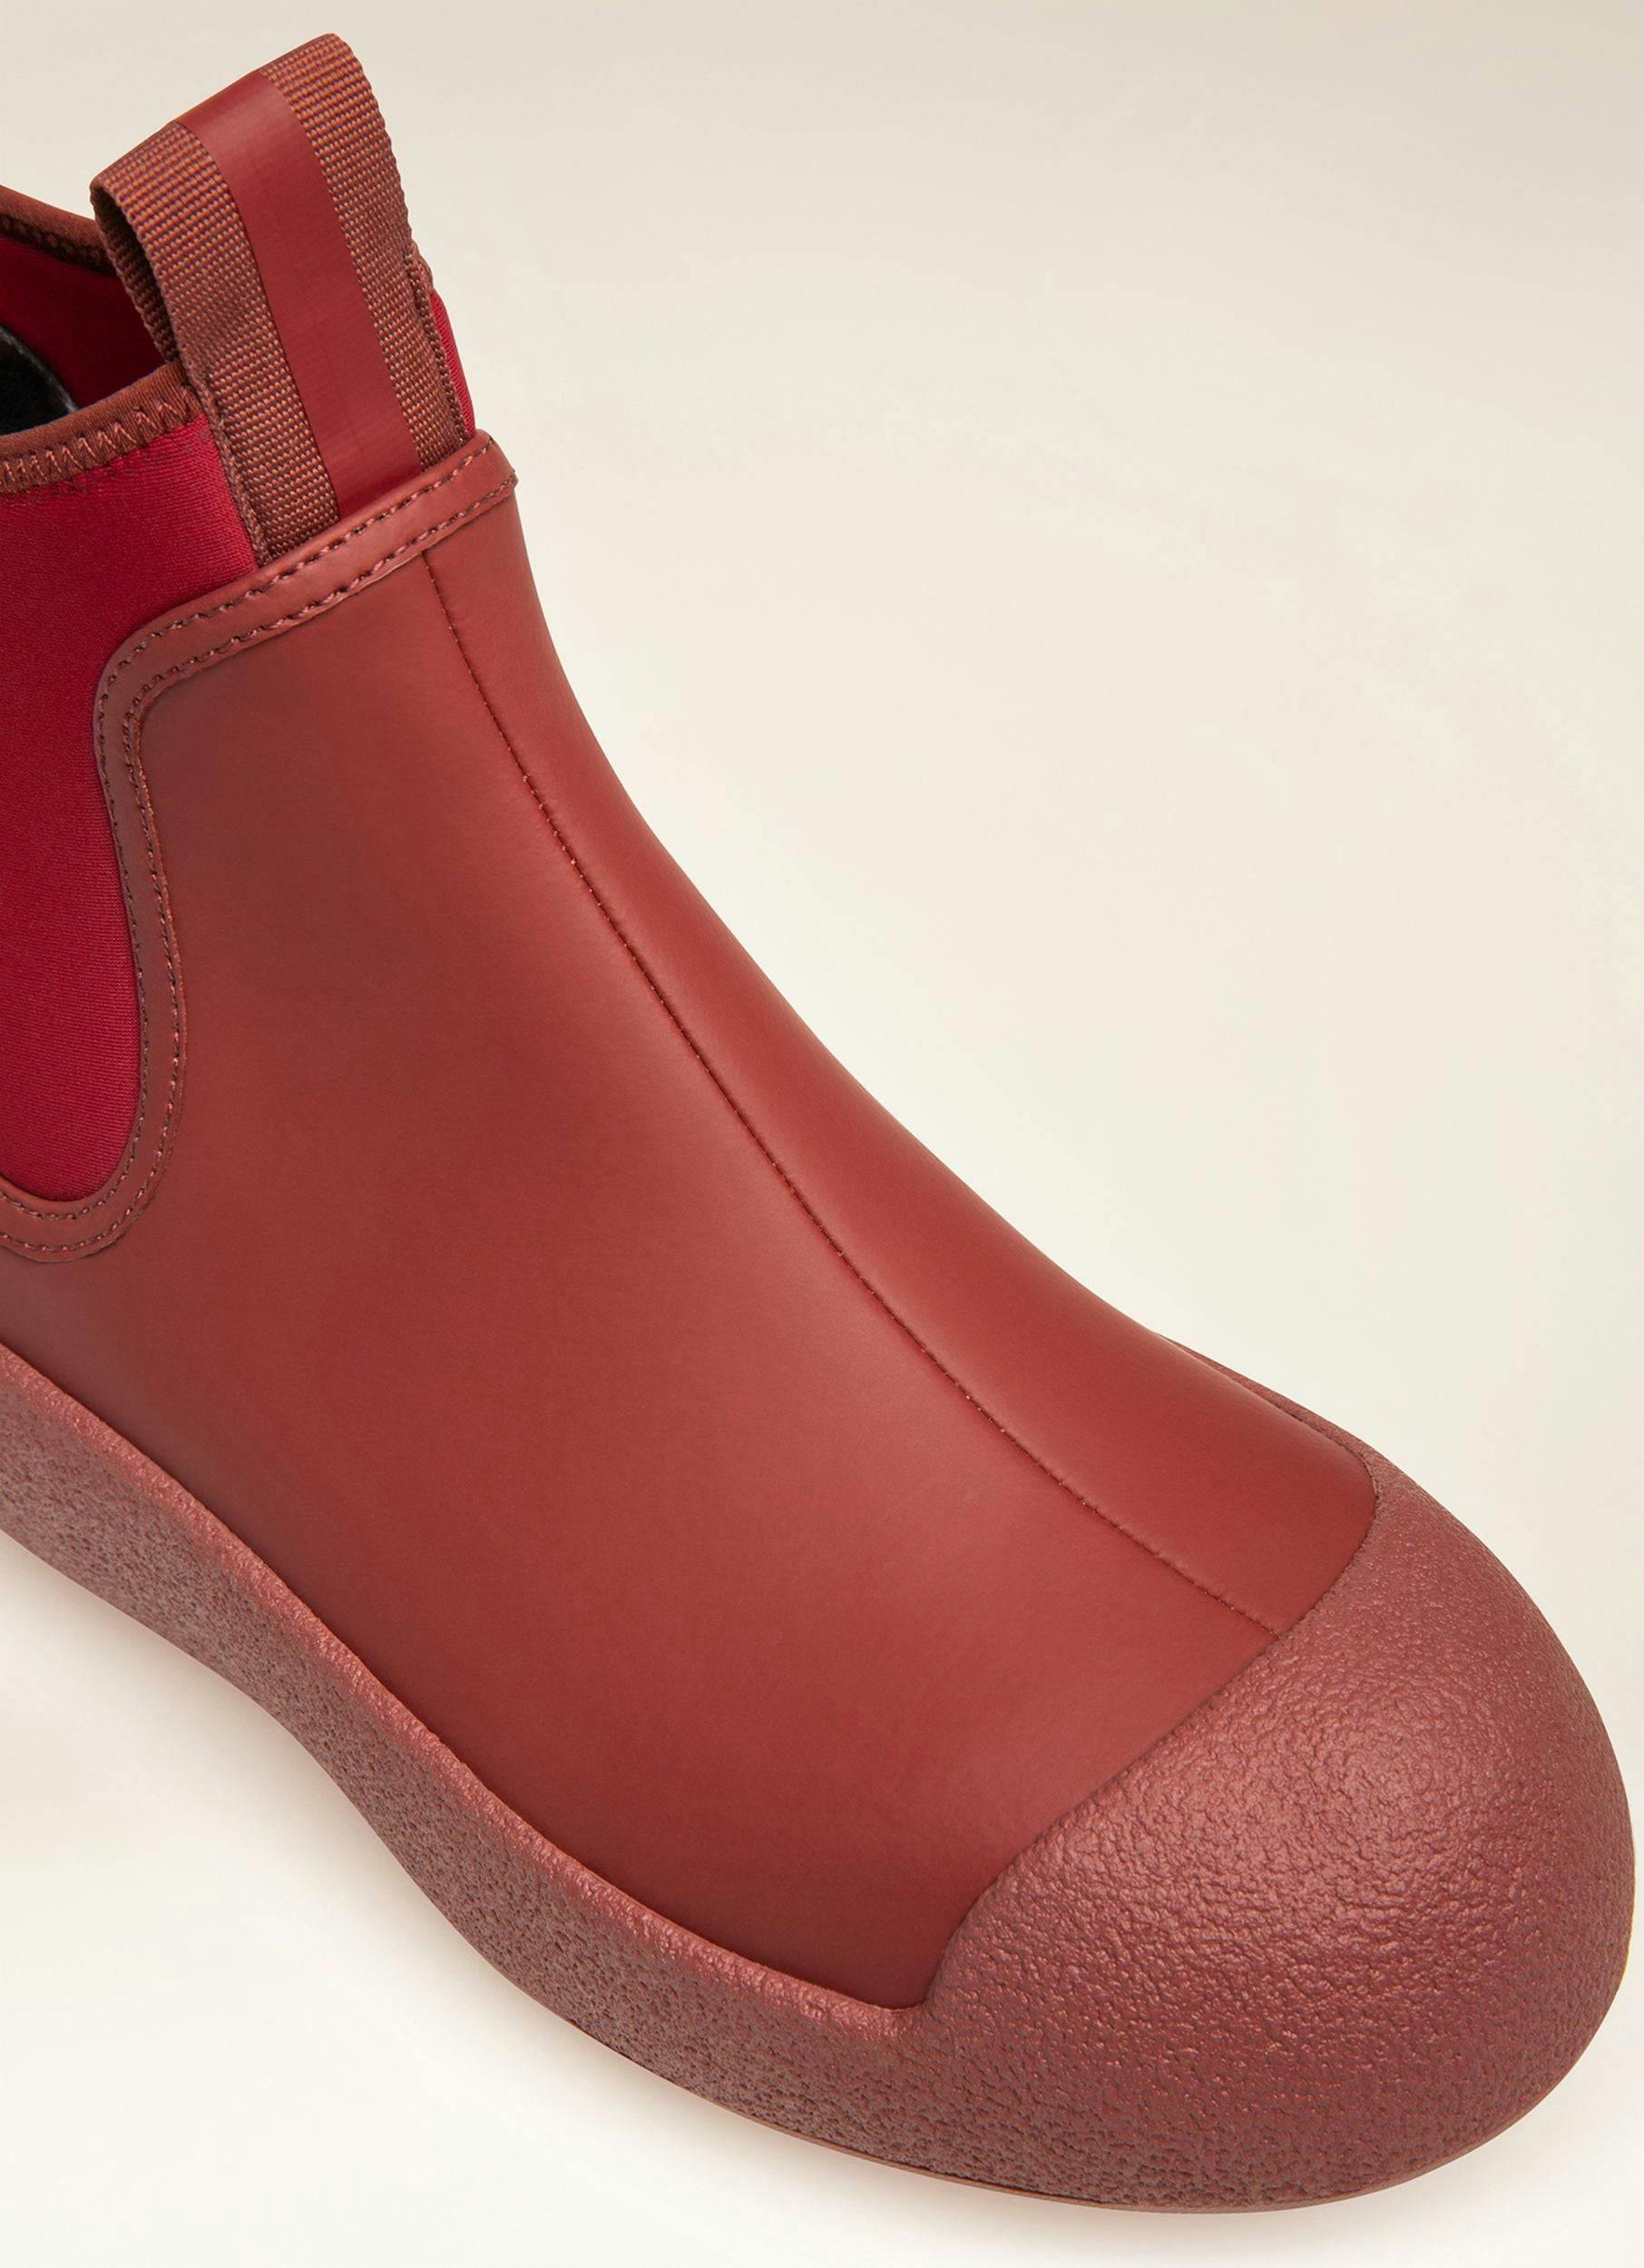 BALLY CURLING Leather Boots In Heritage Red - Women's - Bally - 02